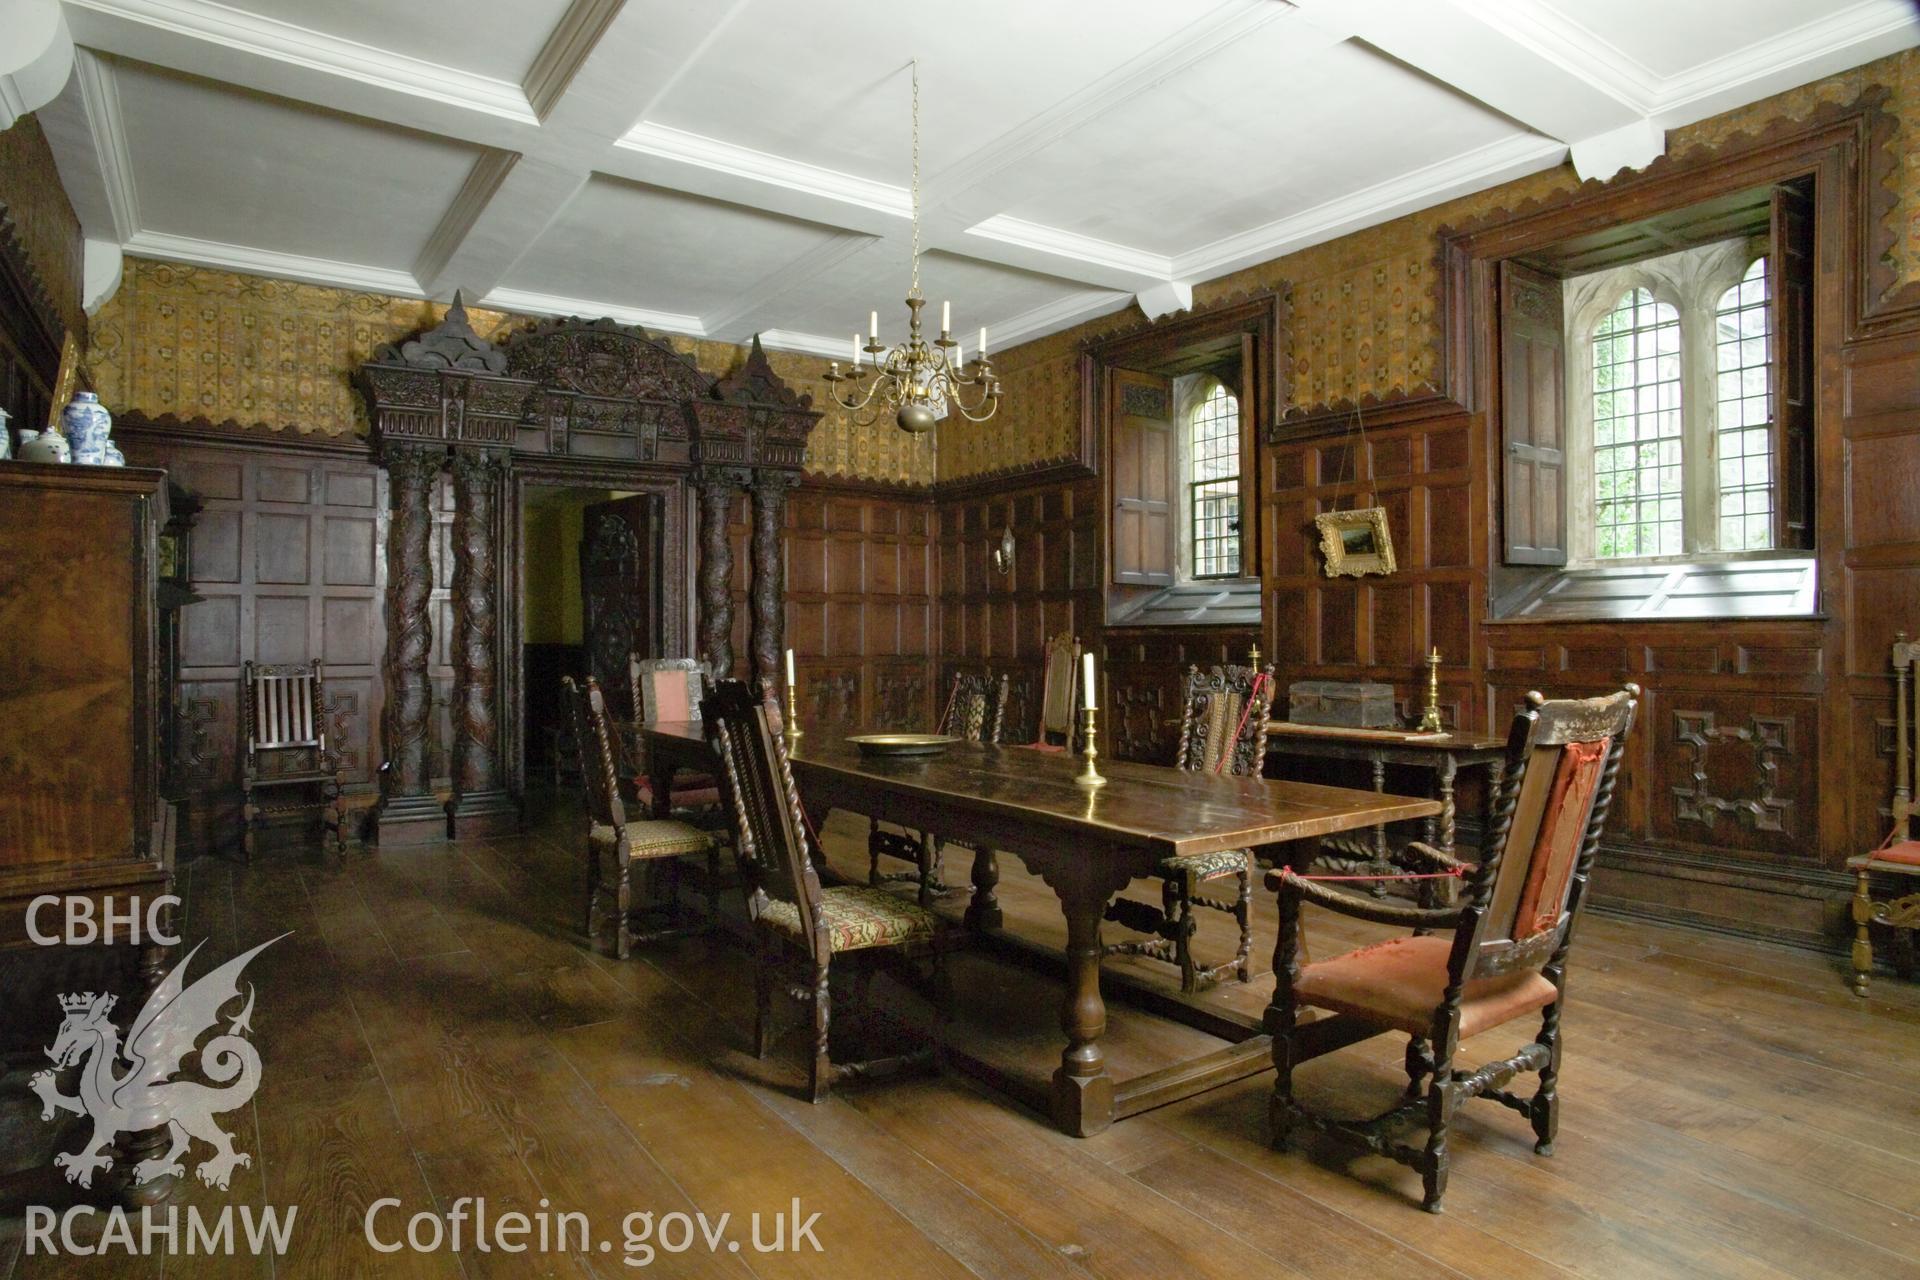 The panelled room.